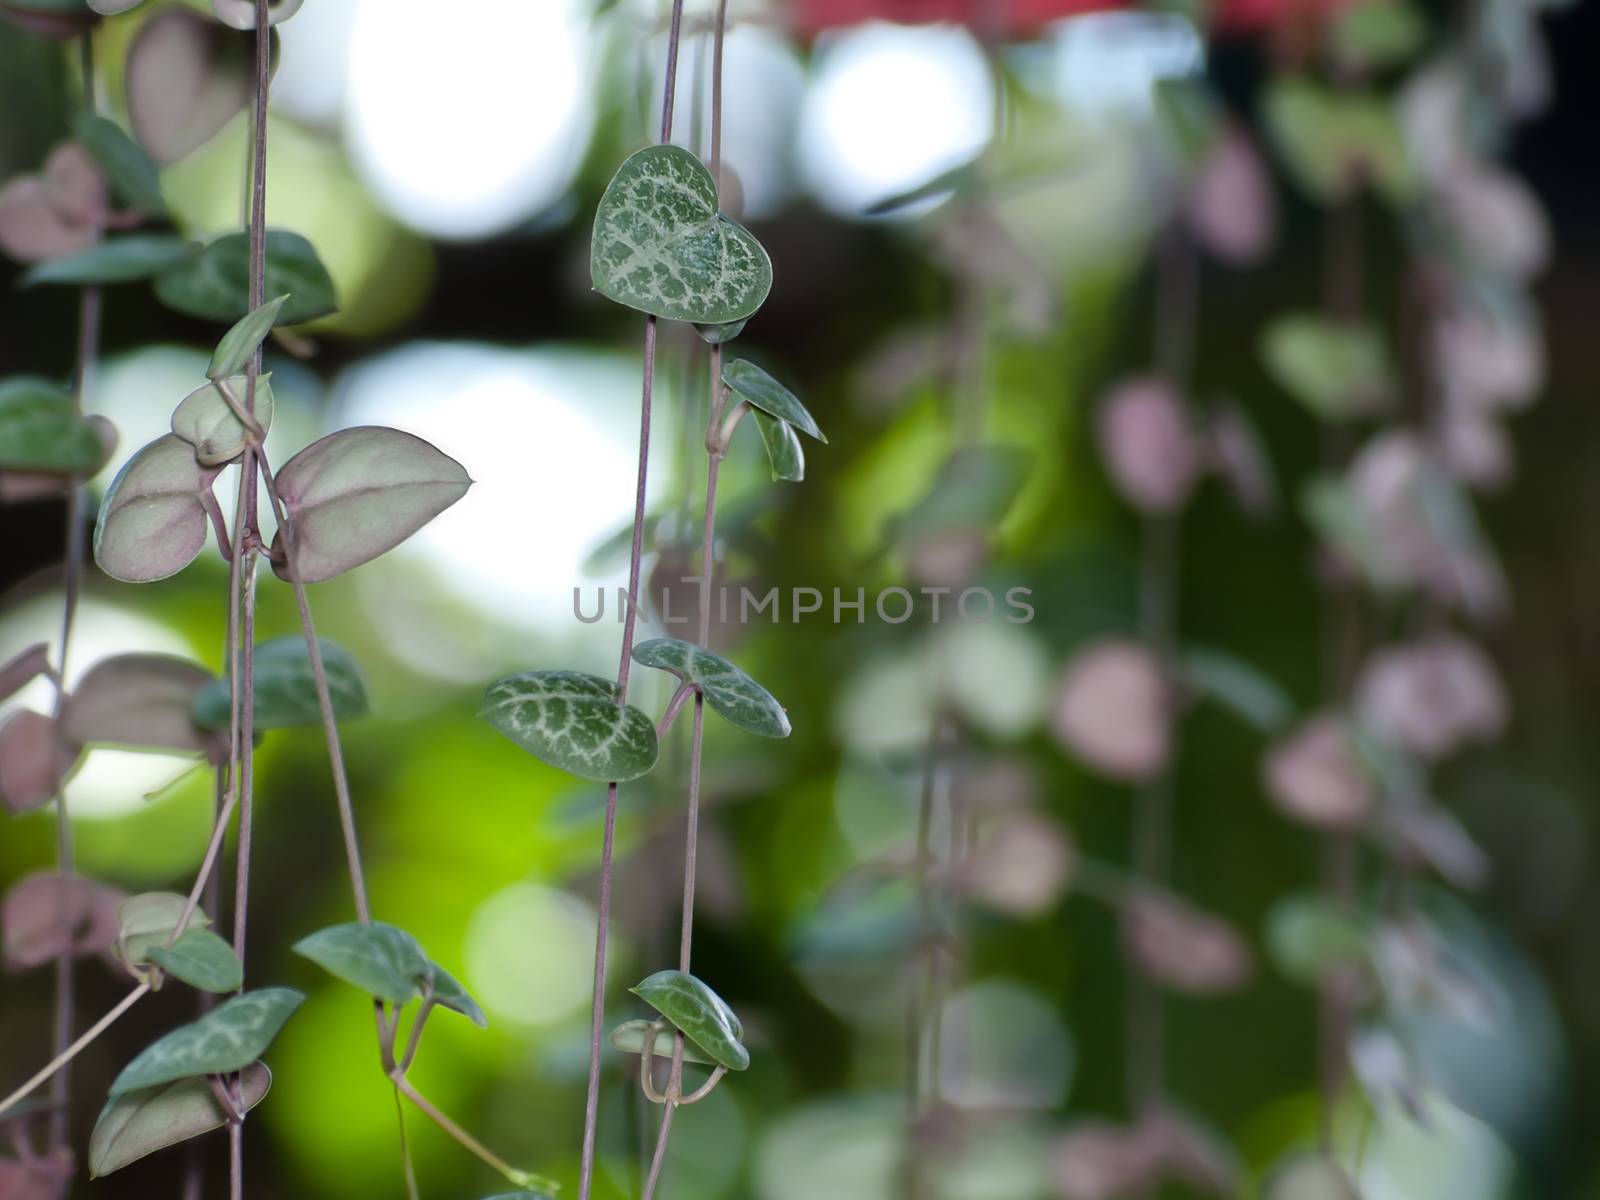 String of hearts background may use for valentine's day or love theme. Ceropegia woodii Family Asclepiadaceae Common names include chain of Hearts, collar of hearts, string of hearts, rosary vine, hearts-on-a-string, sweetheart vine.